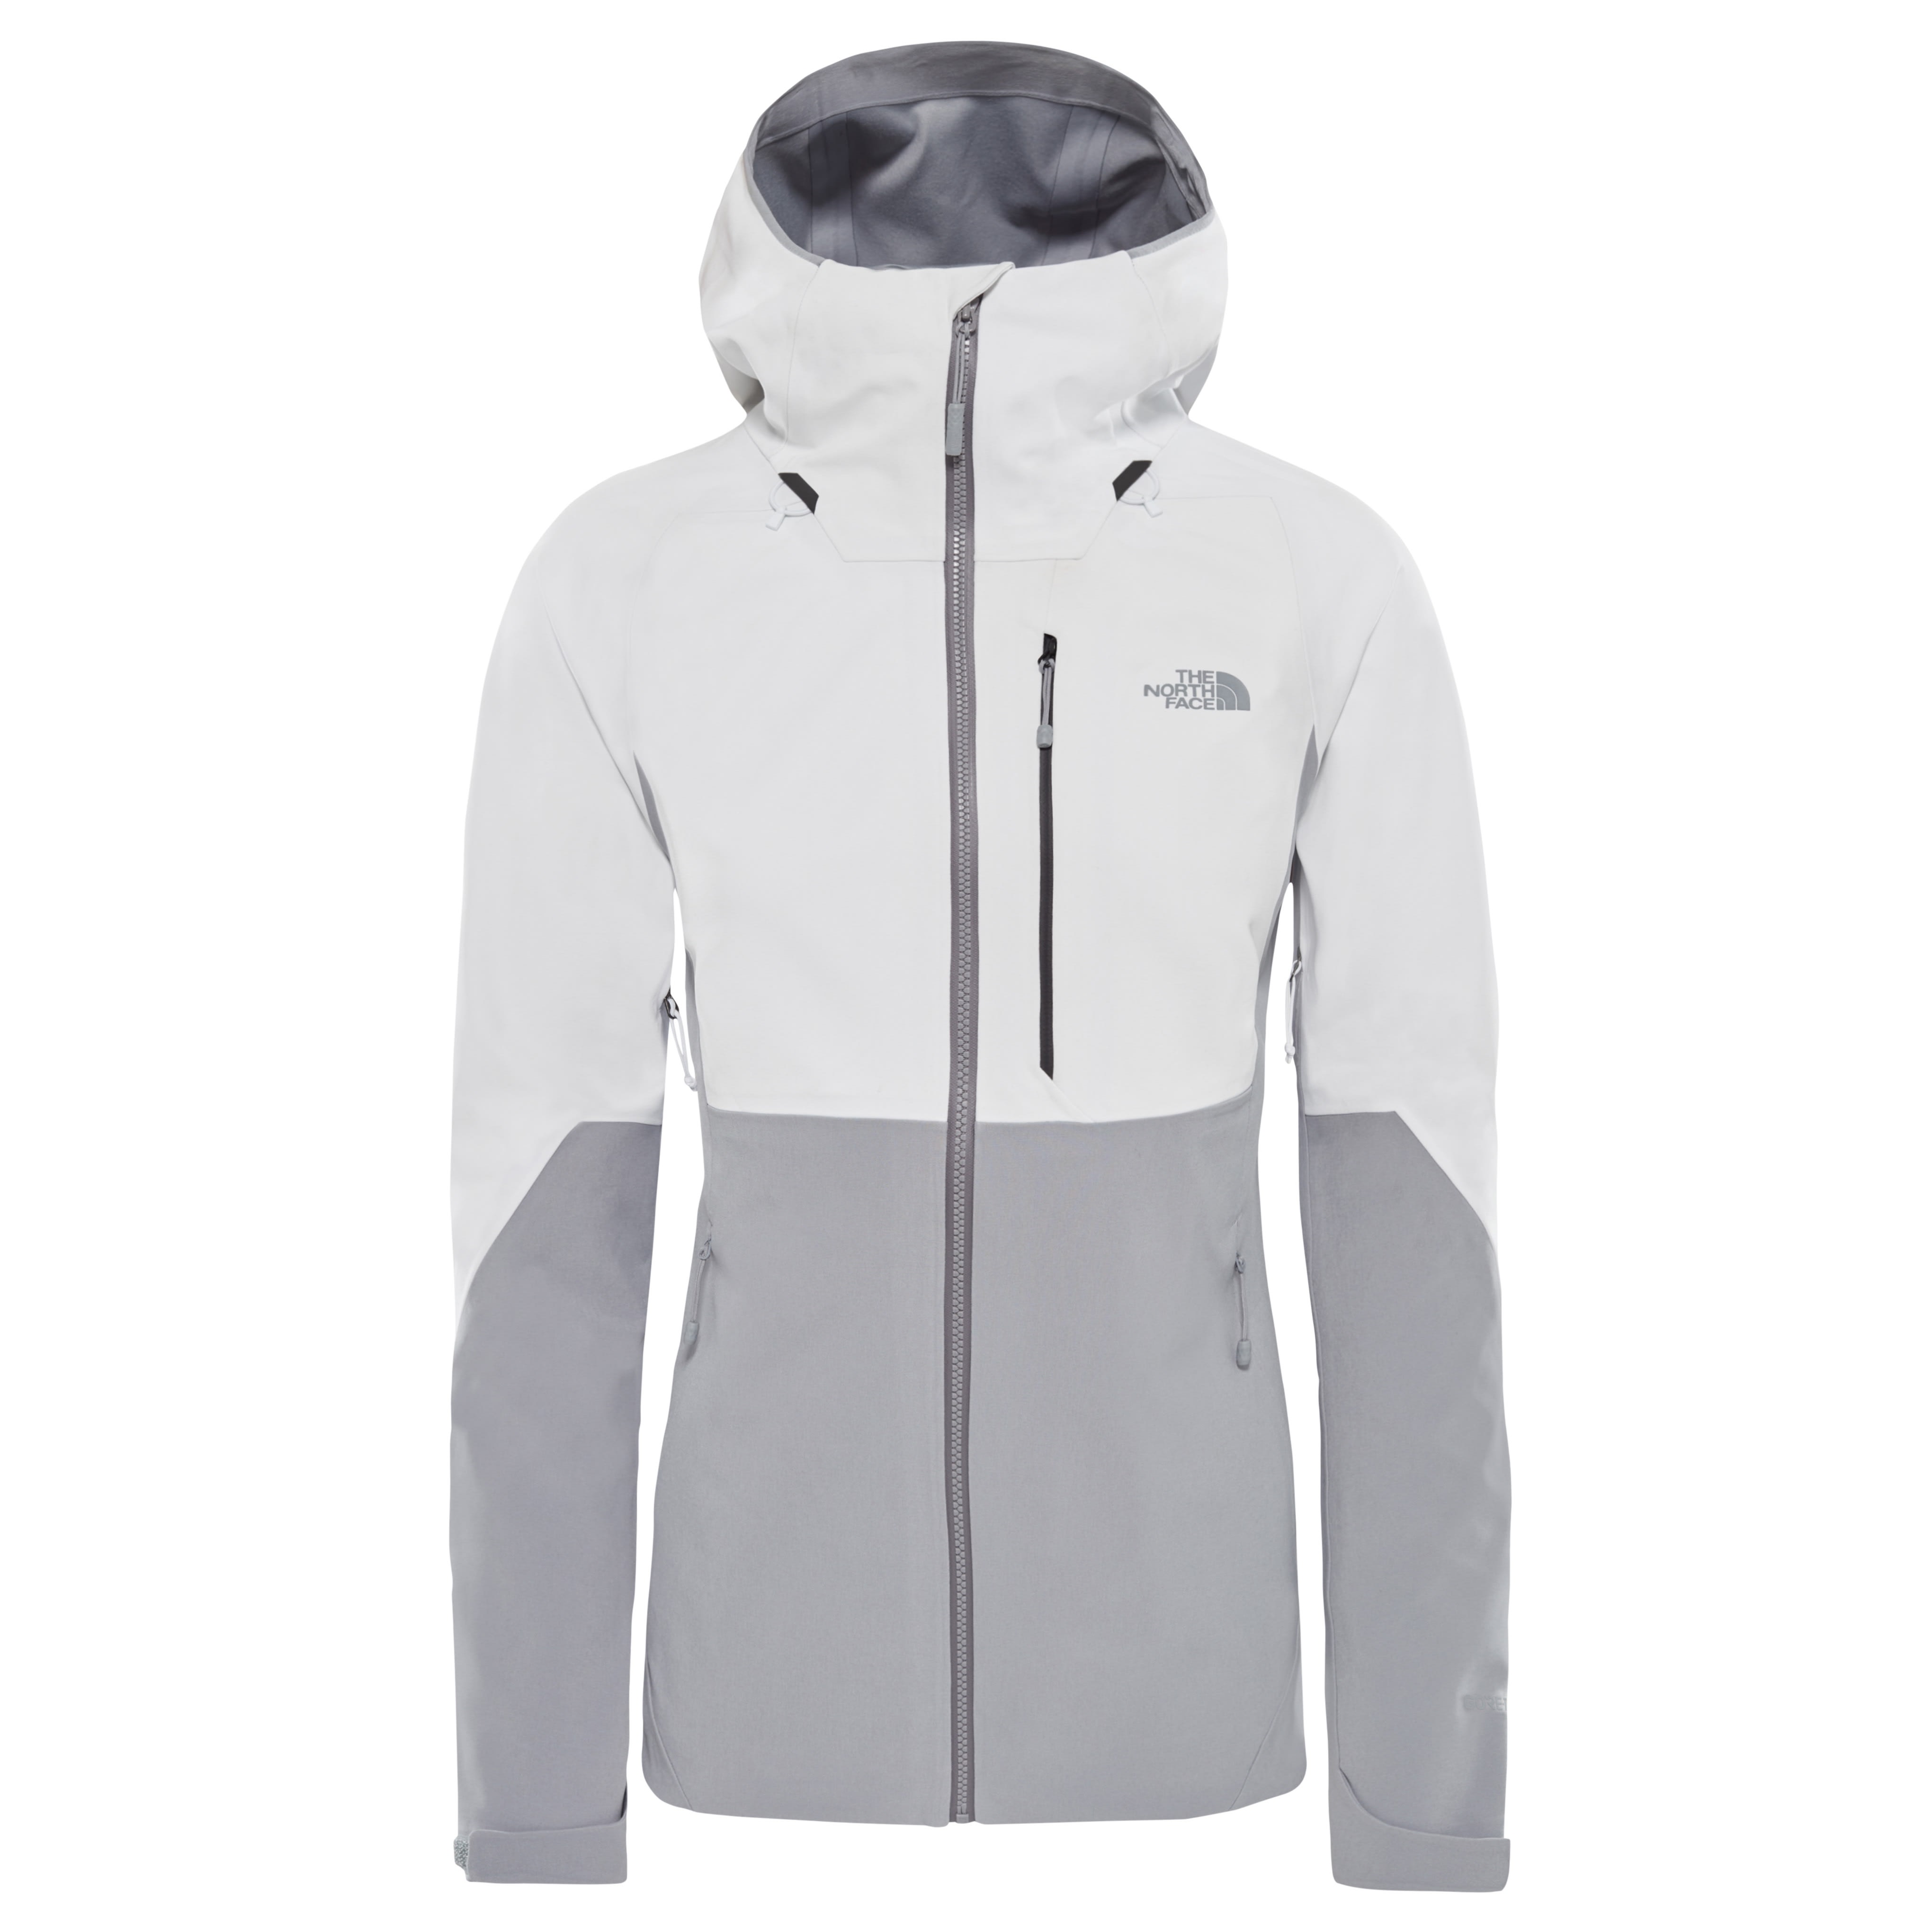 north face gore tex jacket women's